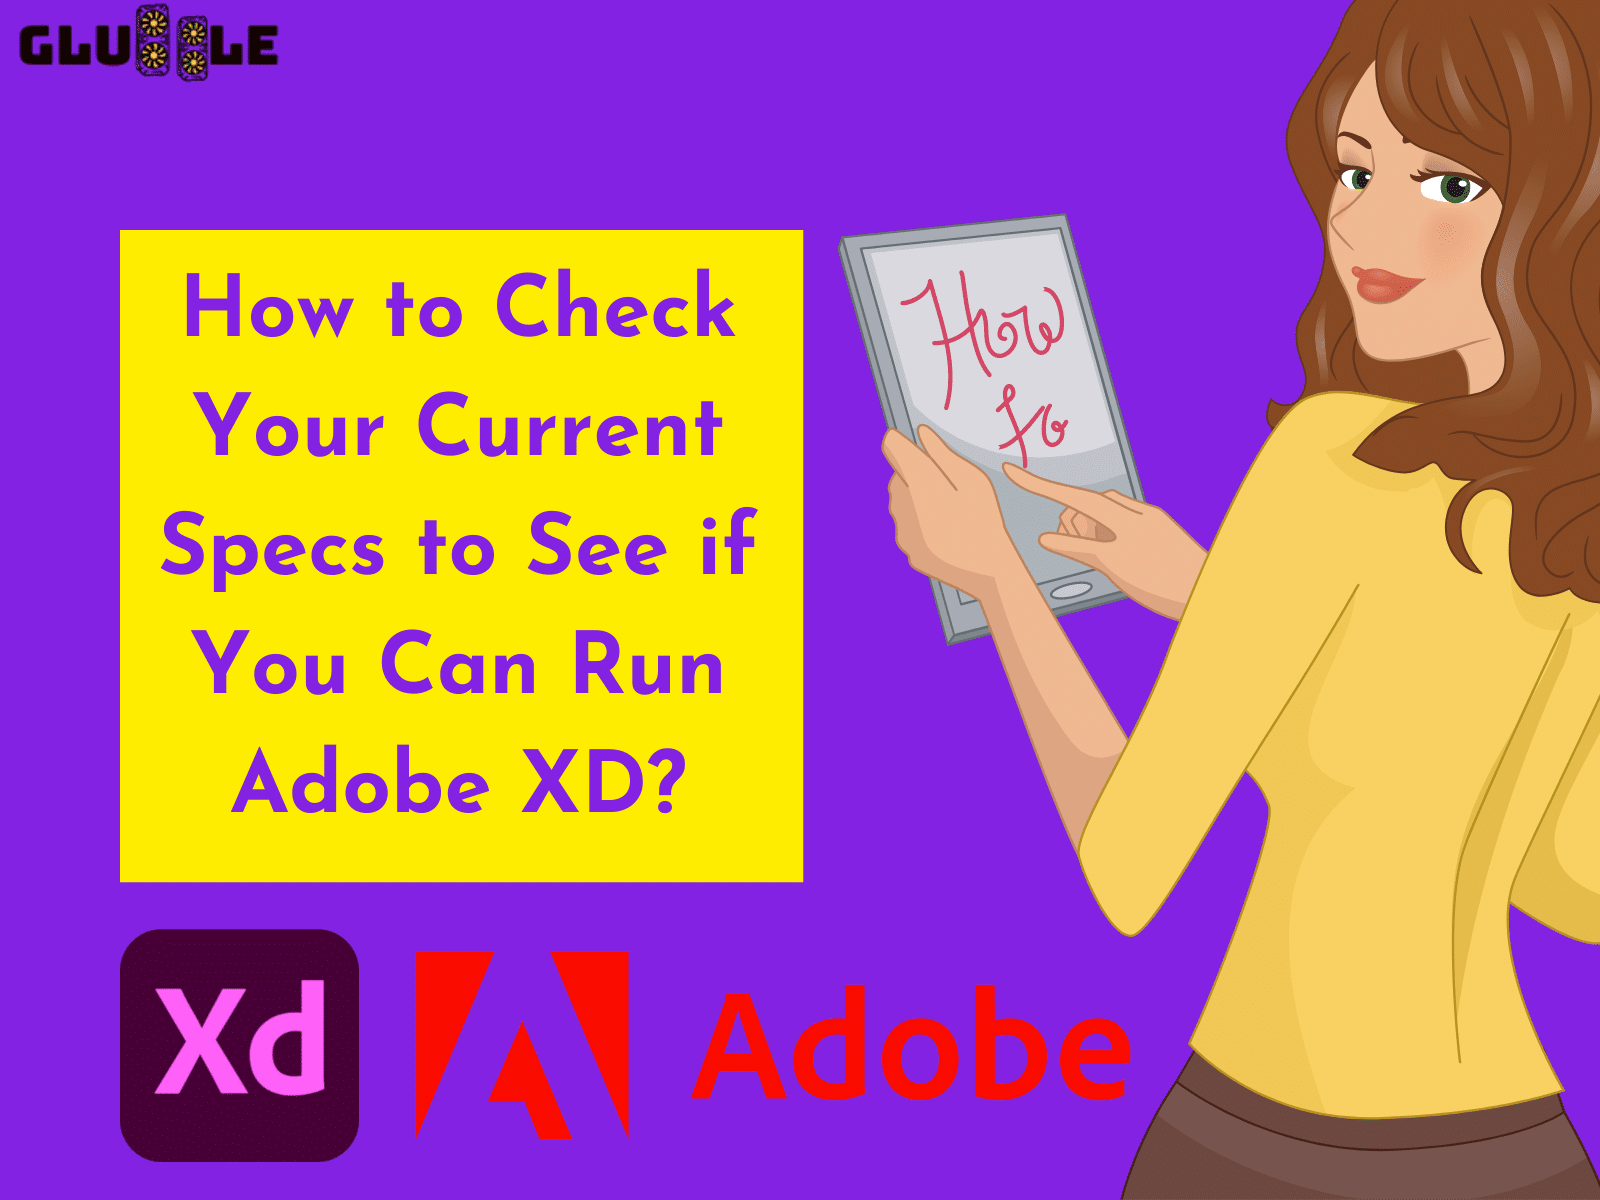 How to Check Your Current Specs to See if You Can Run Adobe XD.